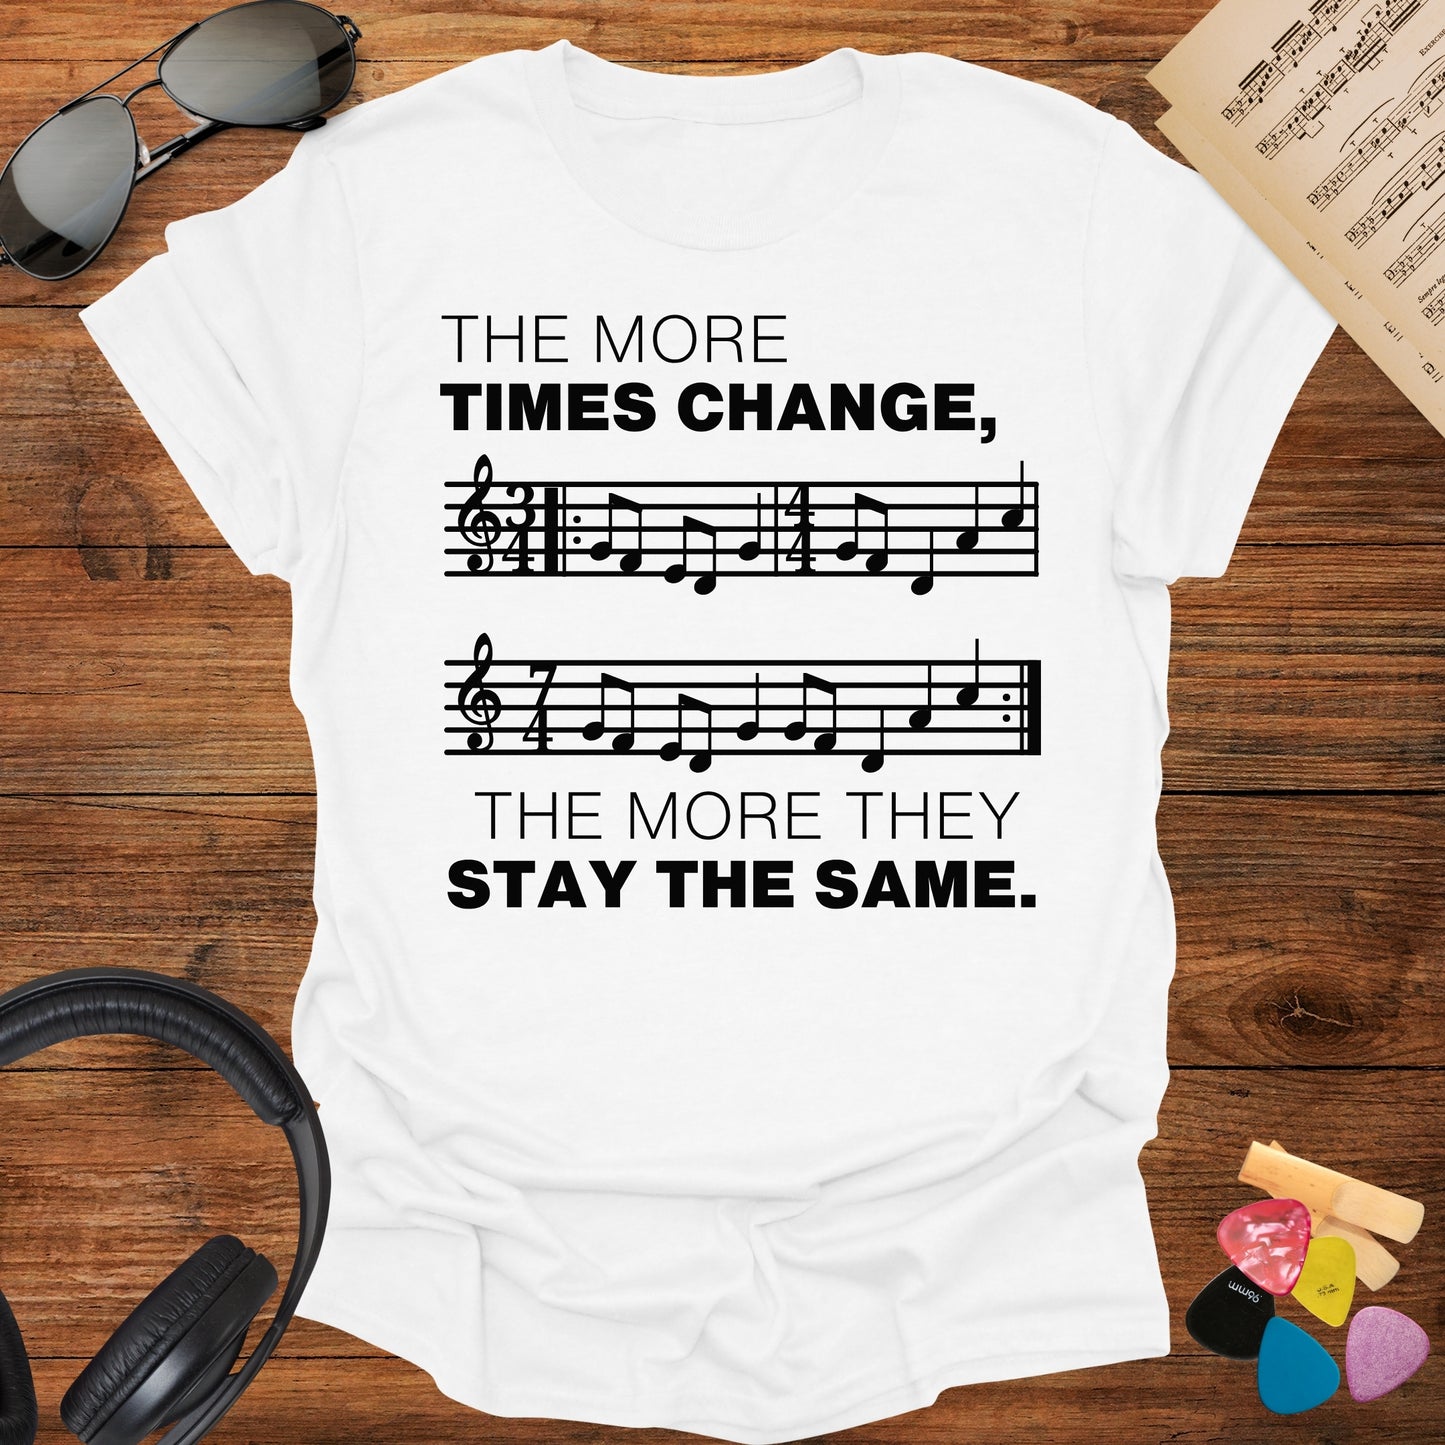 The More Times Change T-Shirt